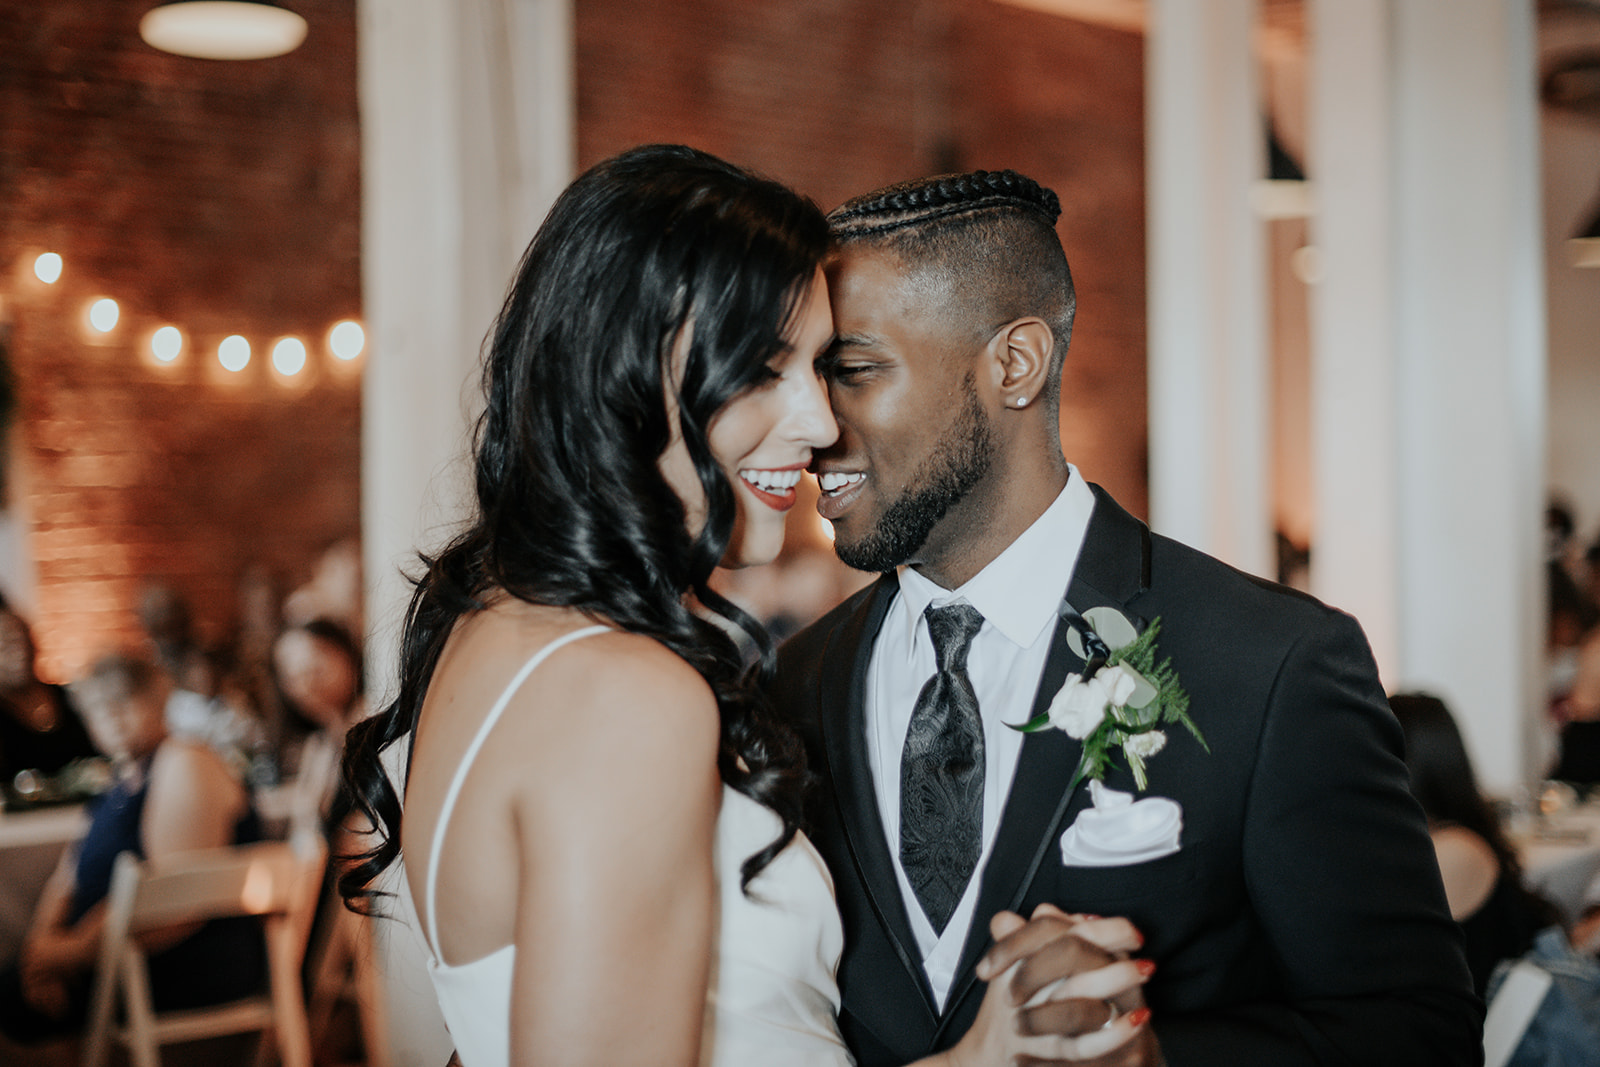 Beautiful wedding at The Unique Space in downtown LA, bride and groom first dance